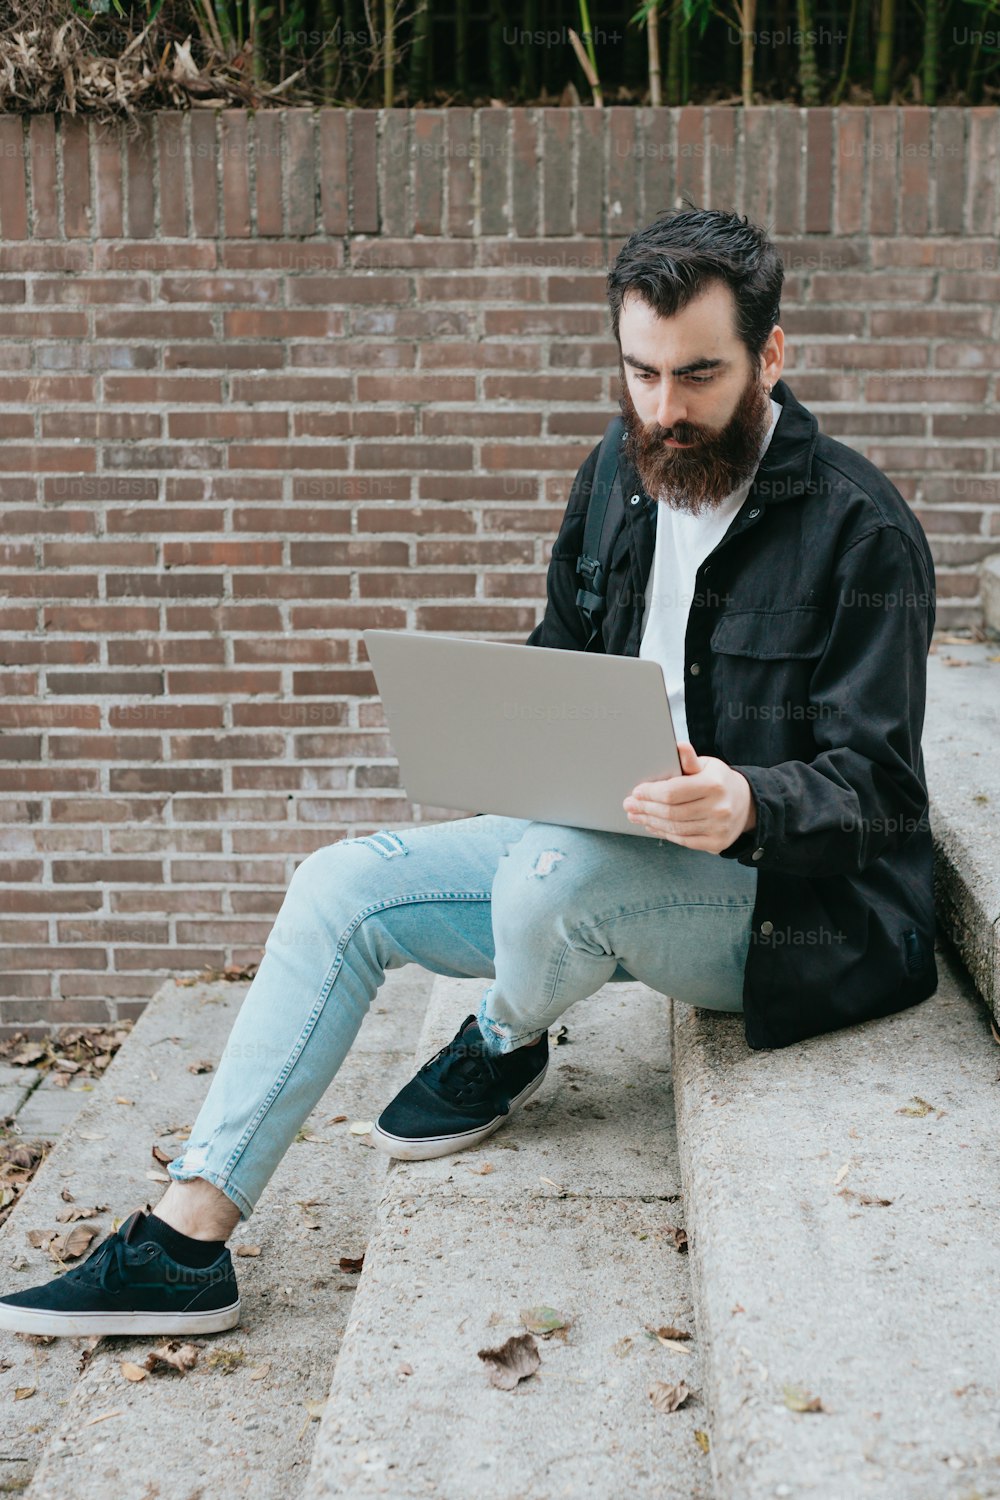 a man with a beard sitting on steps using a laptop